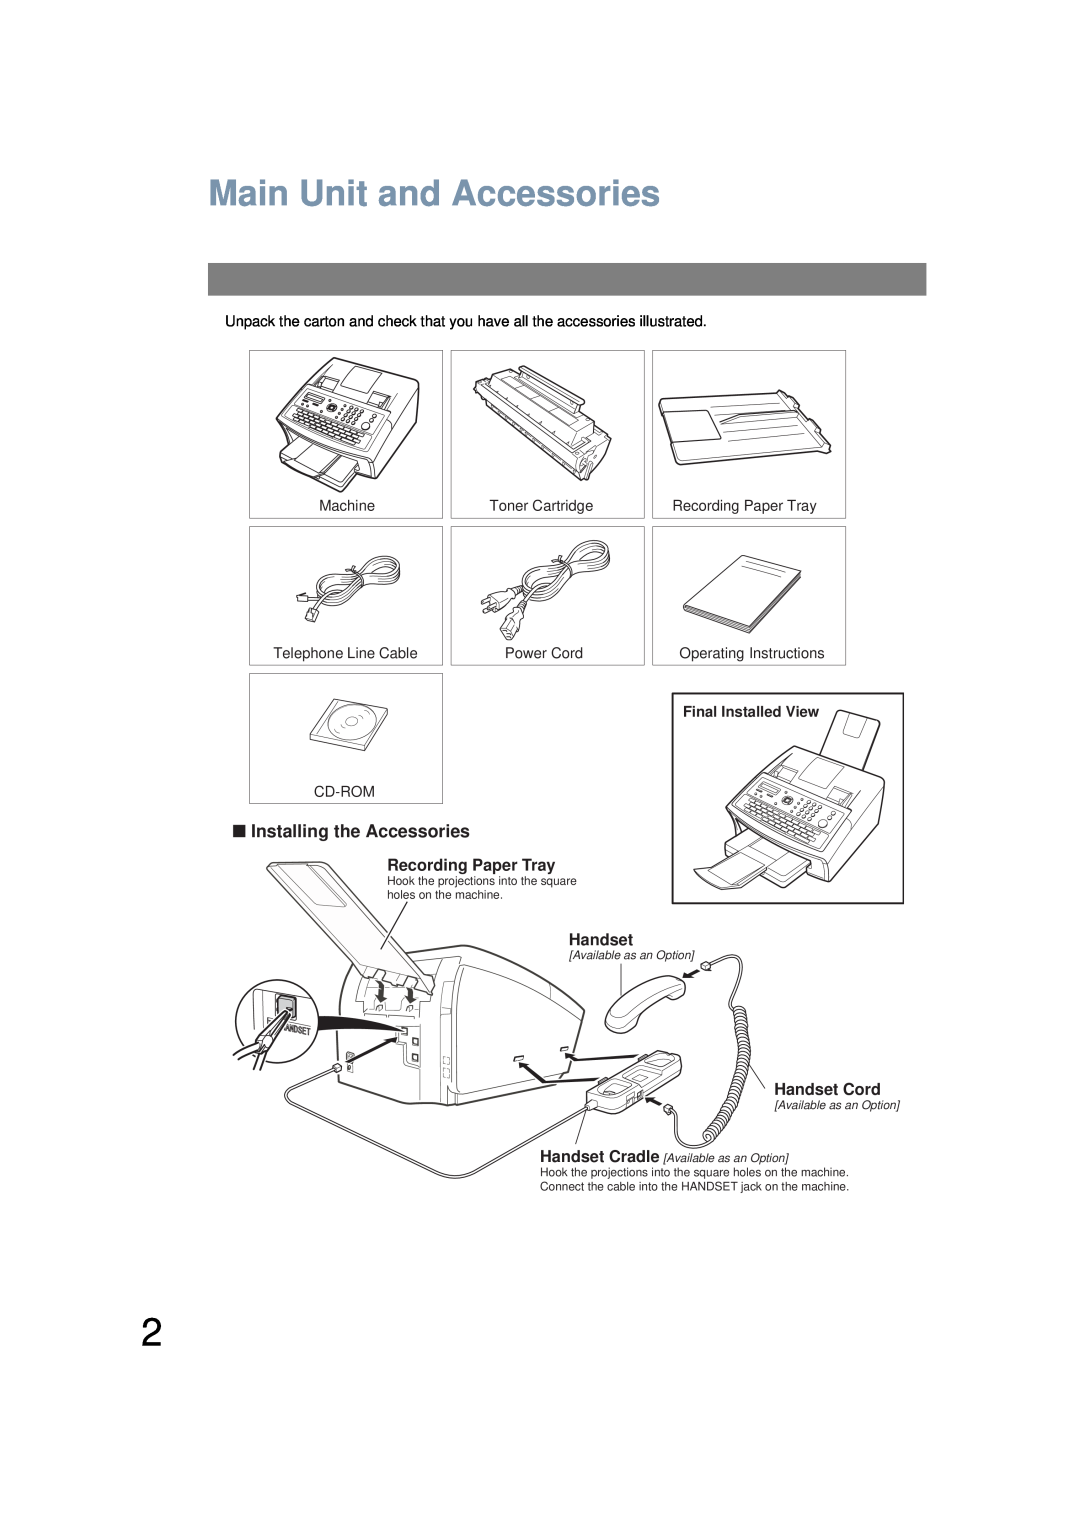 Panasonic UF-6200 operating instructions Main Unit and Accessories, Recording Paper Tray, Handset Cord 